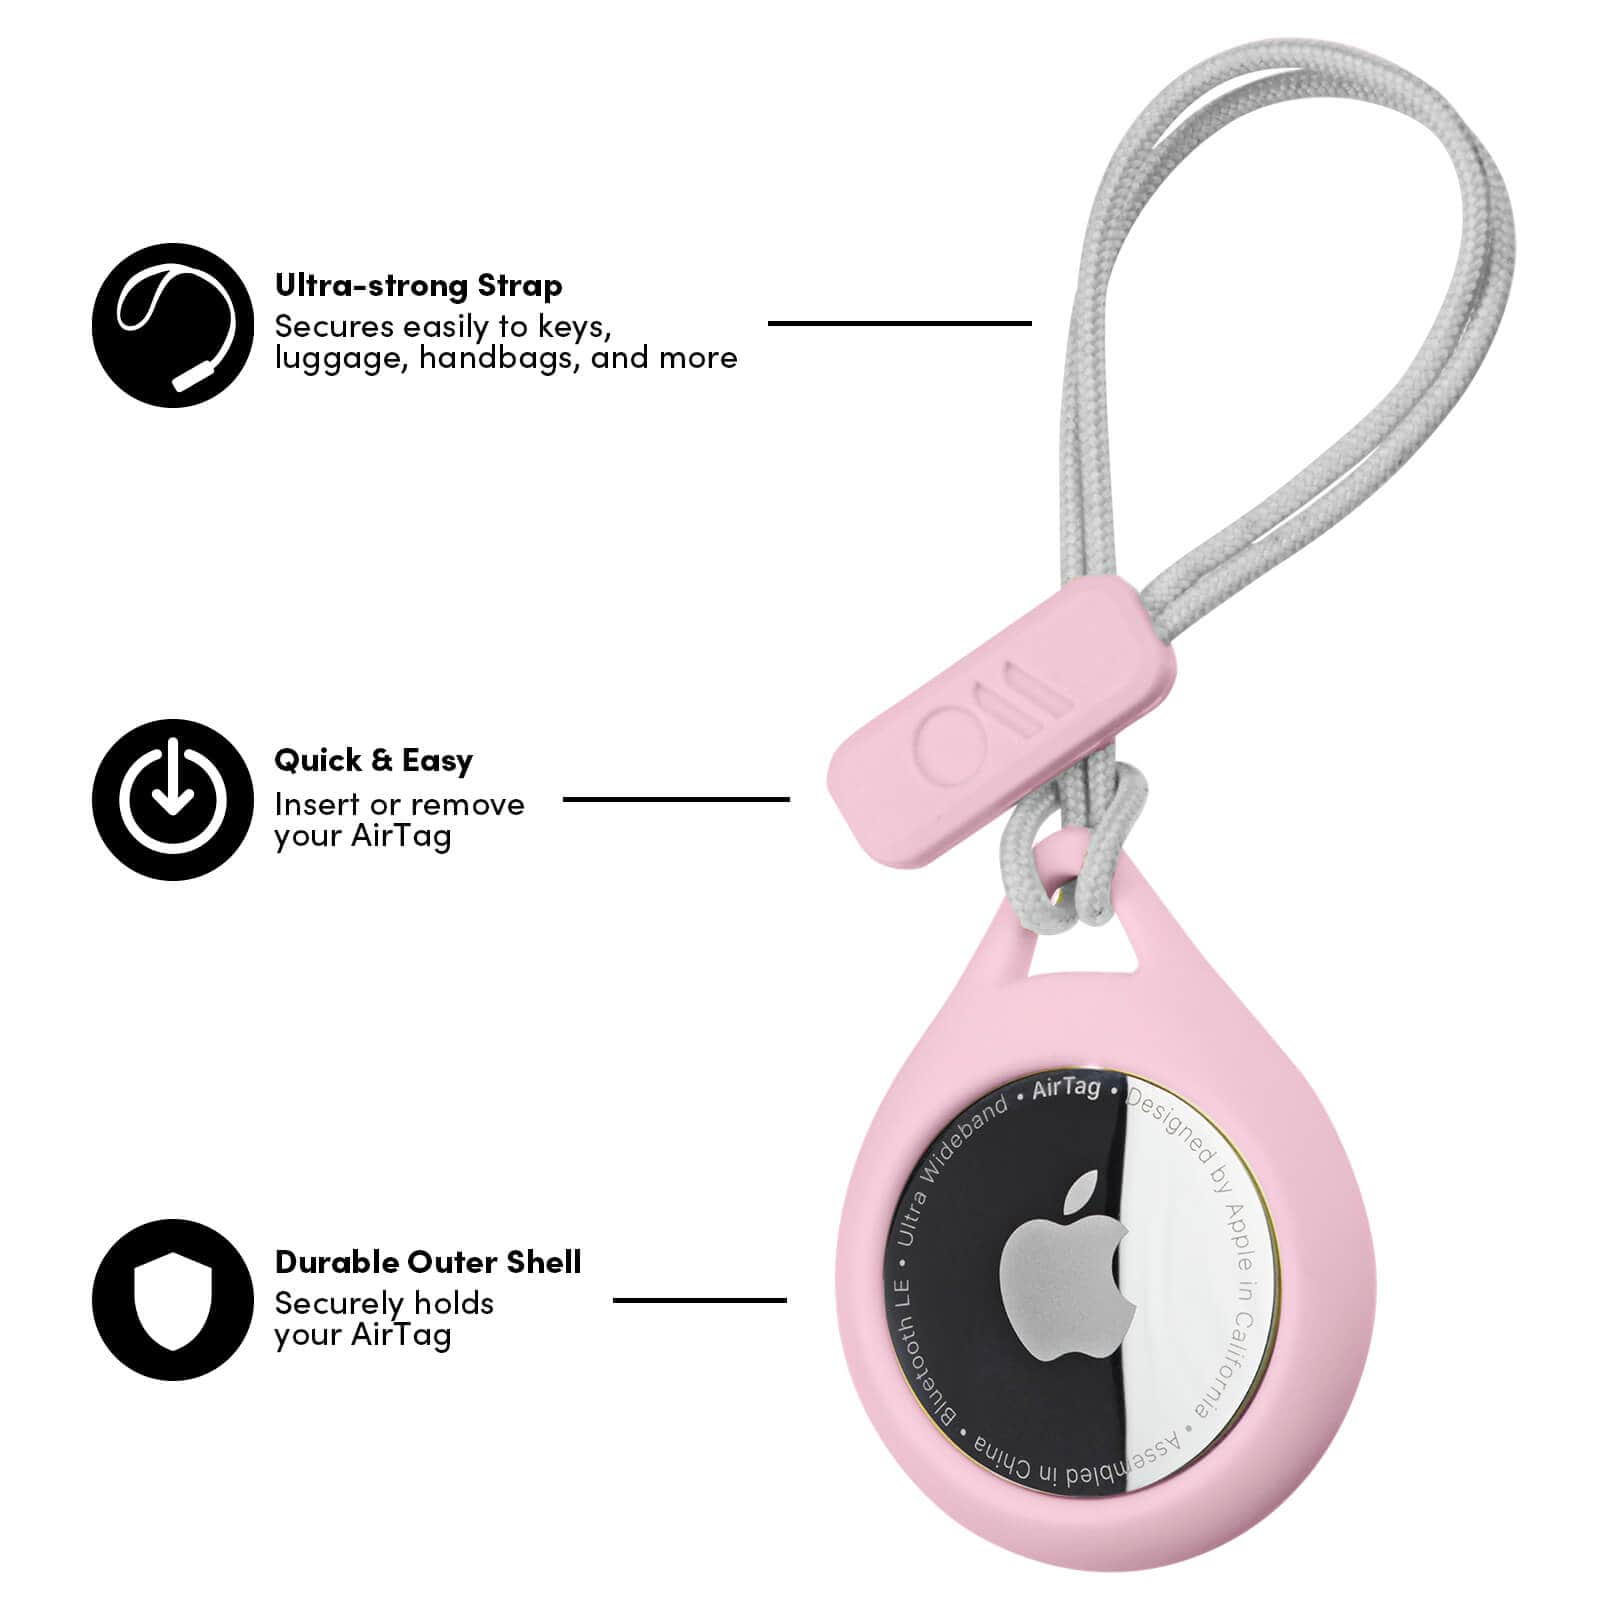 Ultra-strong Strap secures easily to keys, luggage, handbags, and more. Quick and Easy, Insert or remove your AirTag, Durable Outer shell Securely holds your AirTag. color::Blush